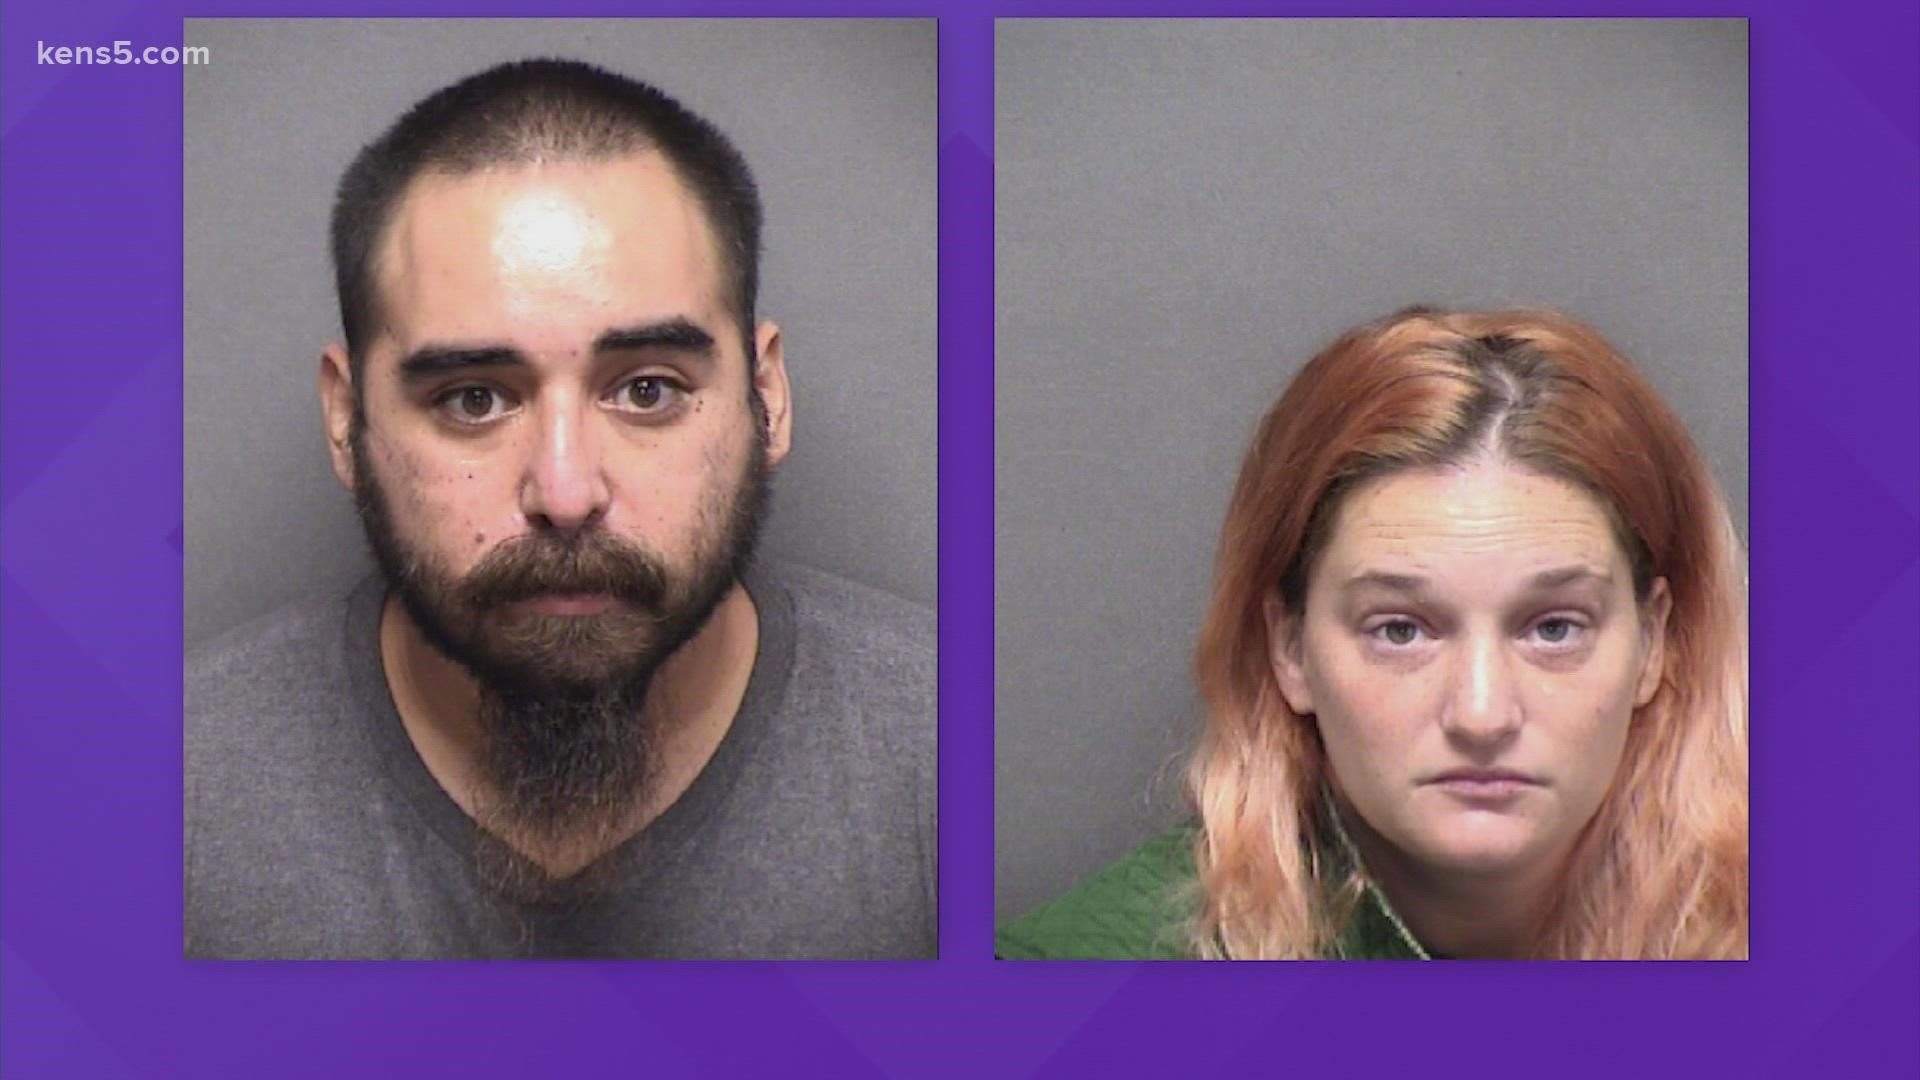 Couple facing several child sex charges, investigators fear there may be more victims kens5 image